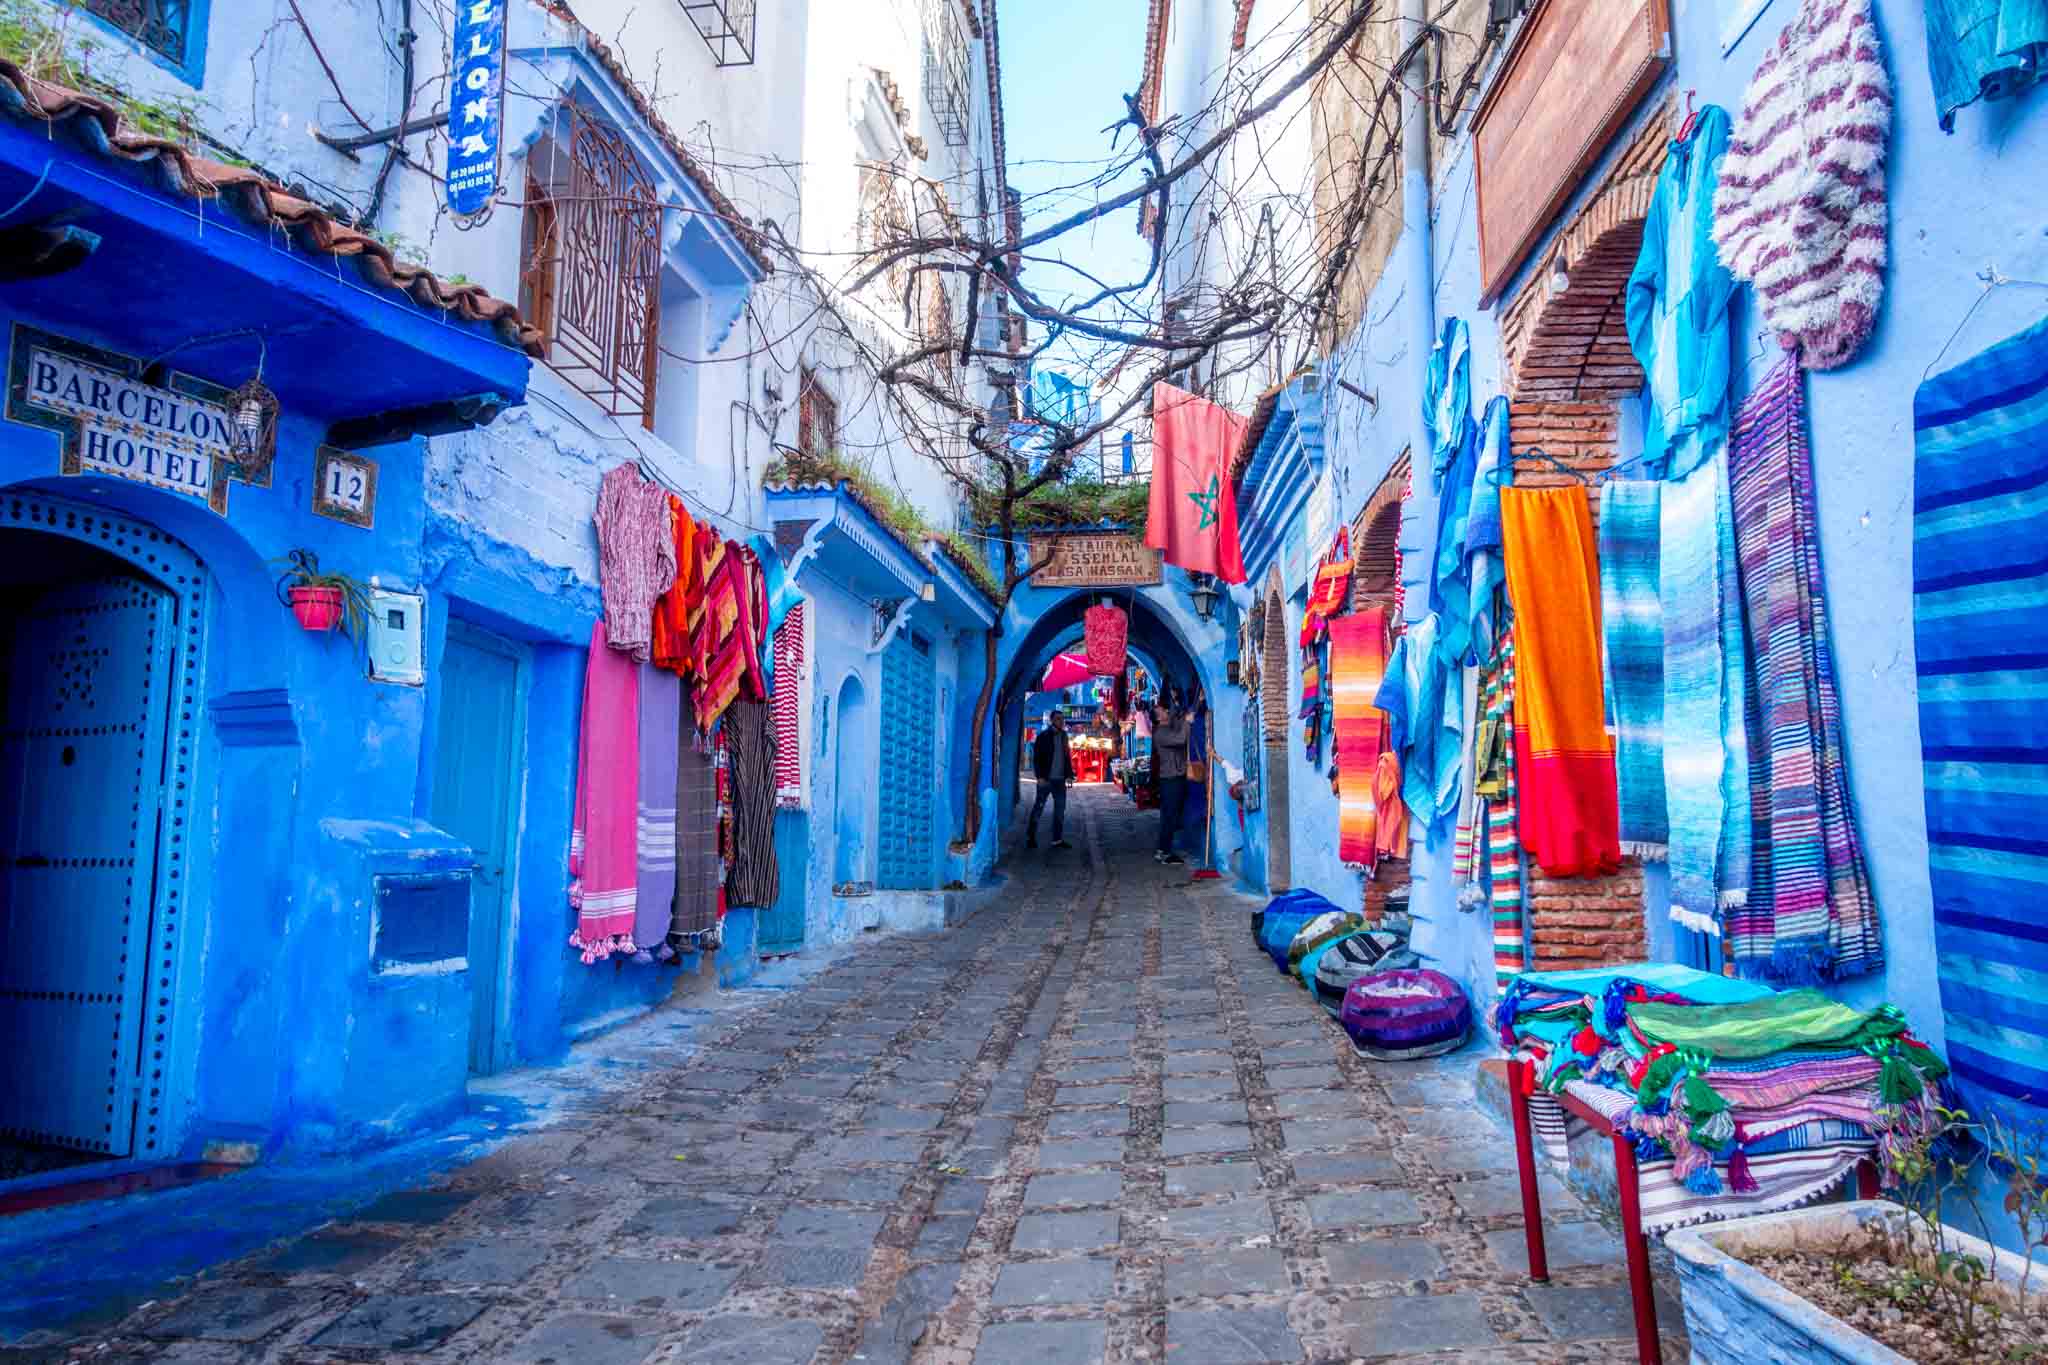 Bright rugs hanging on blue walls along a pedestrian walkway.